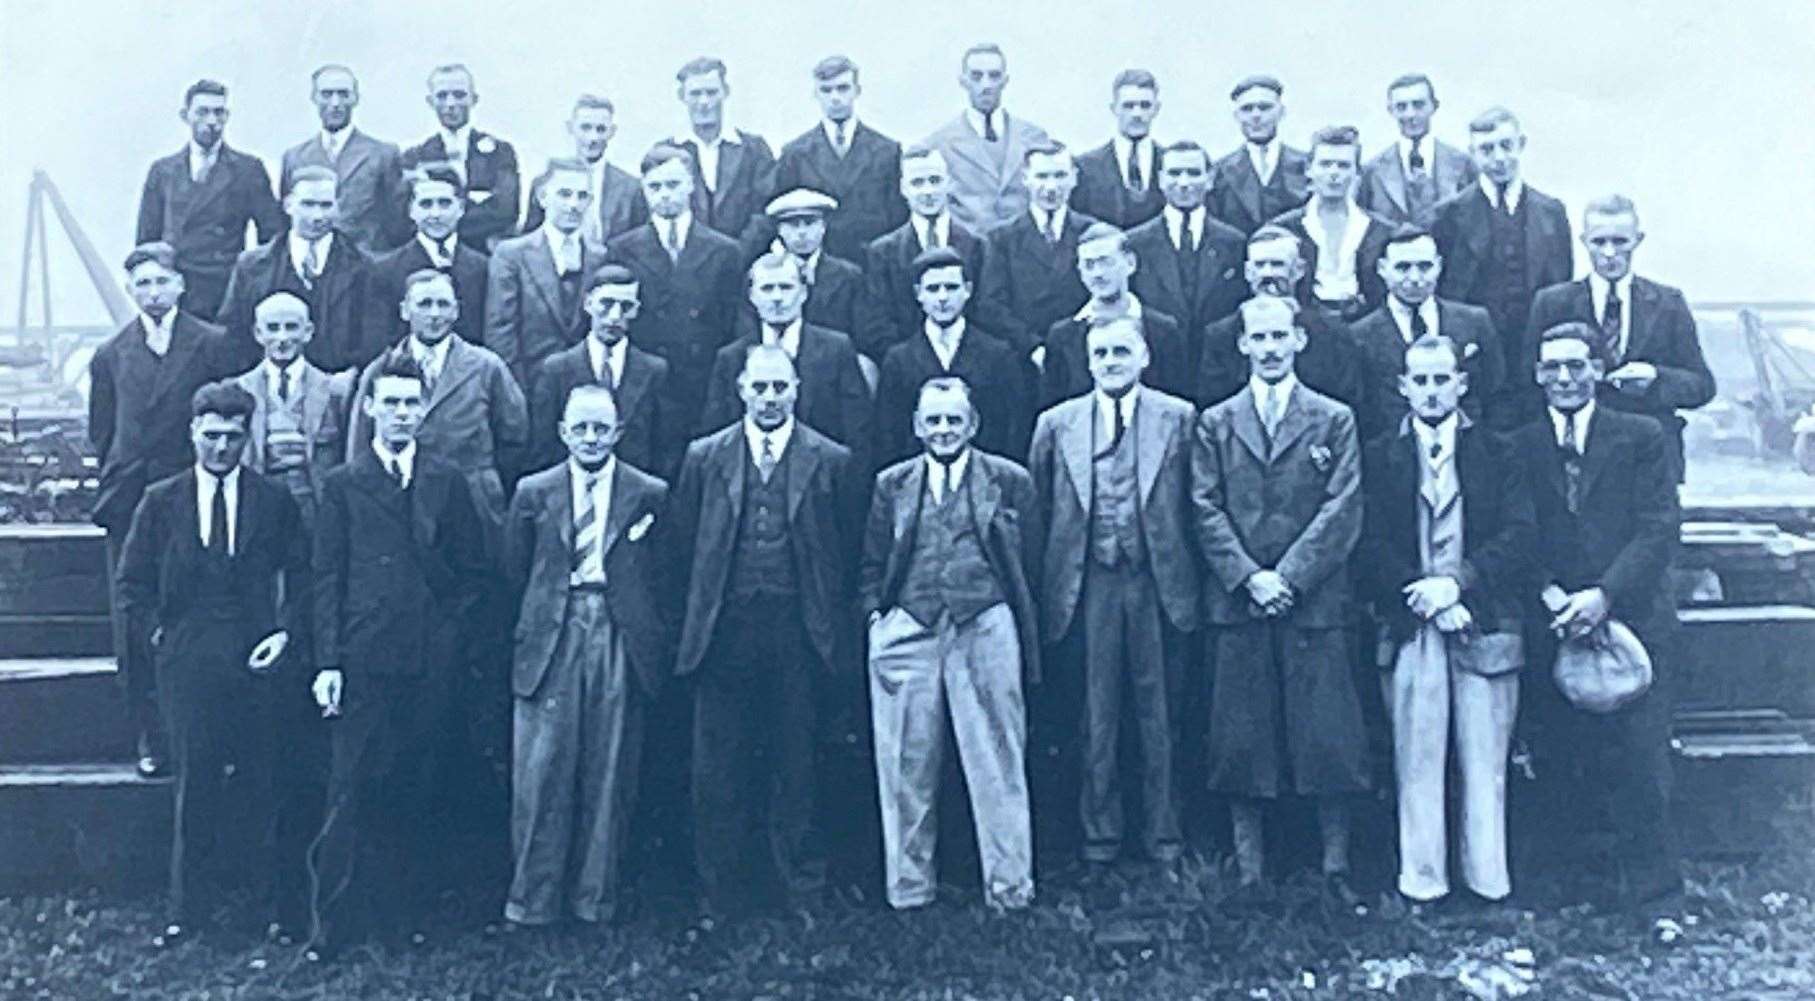 A works outing in 1933